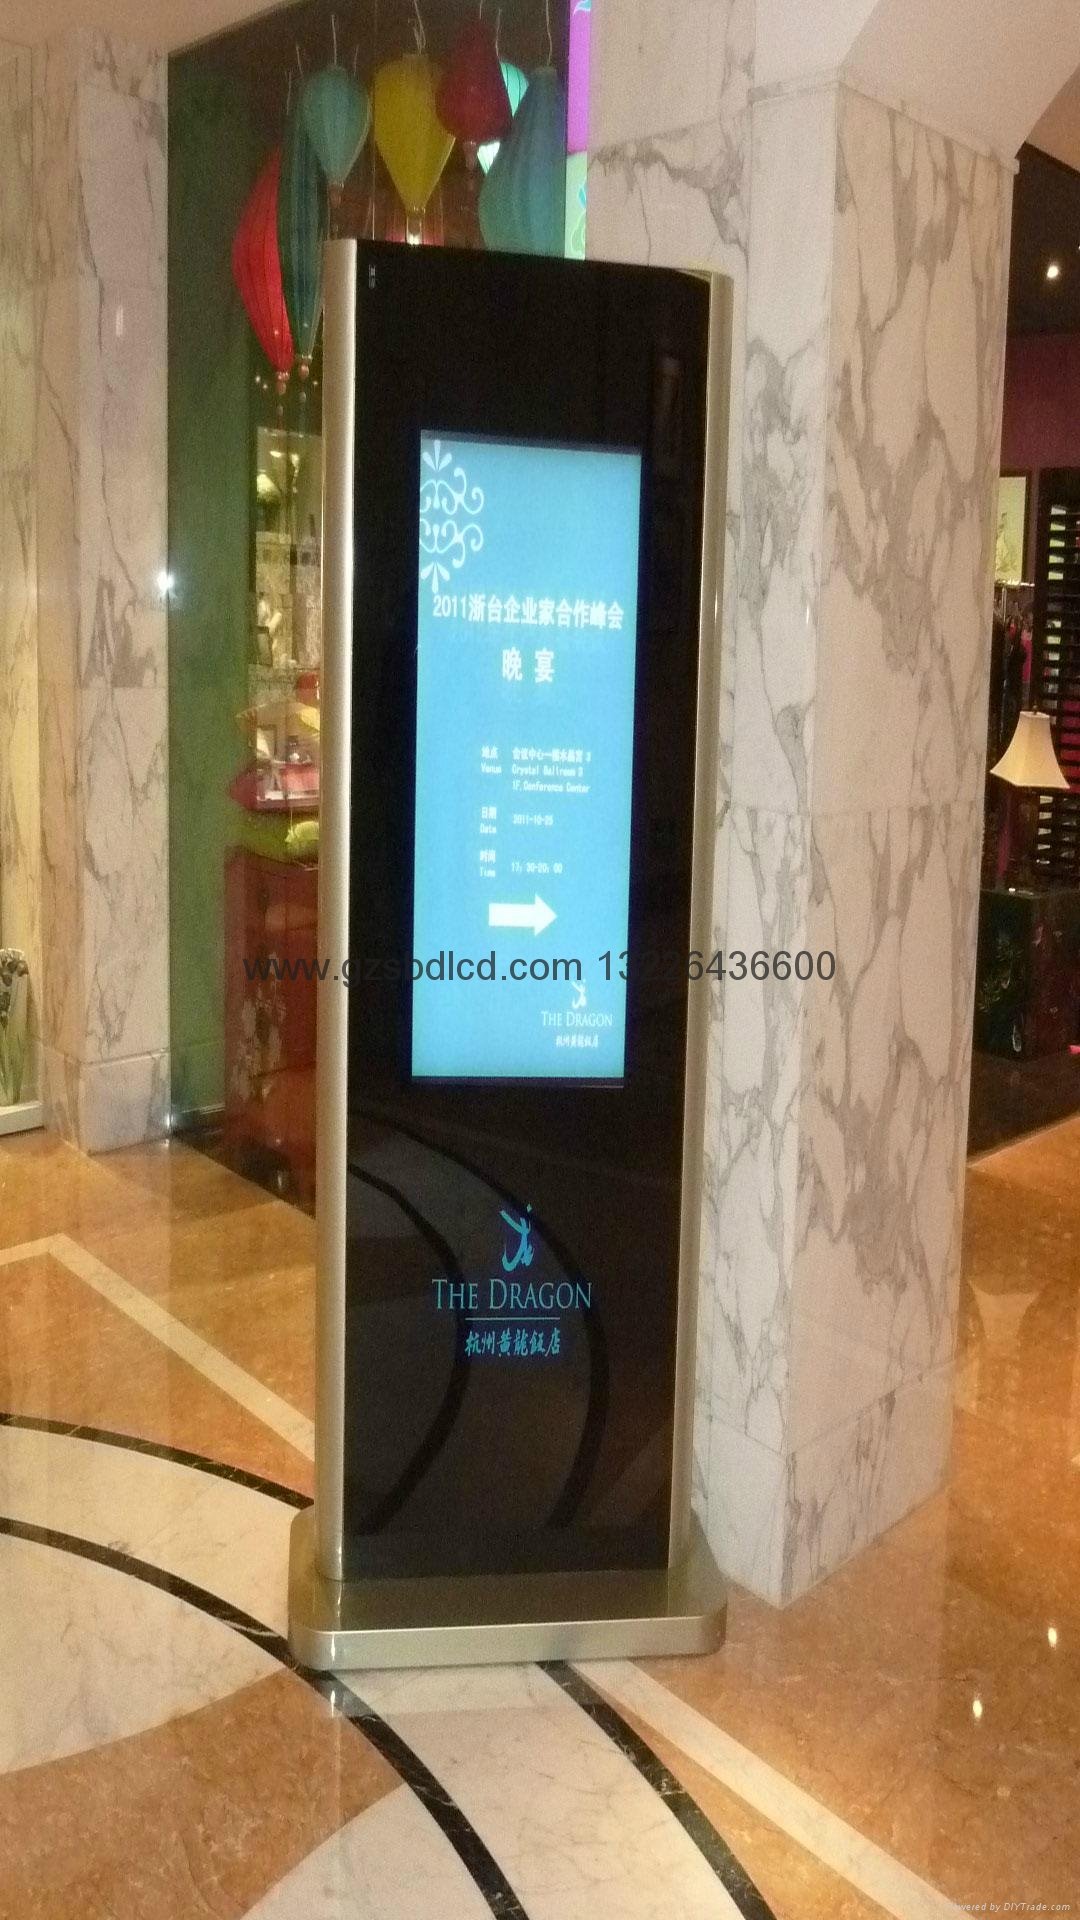 28-inch vertical lcd displays (length of the screen) 10